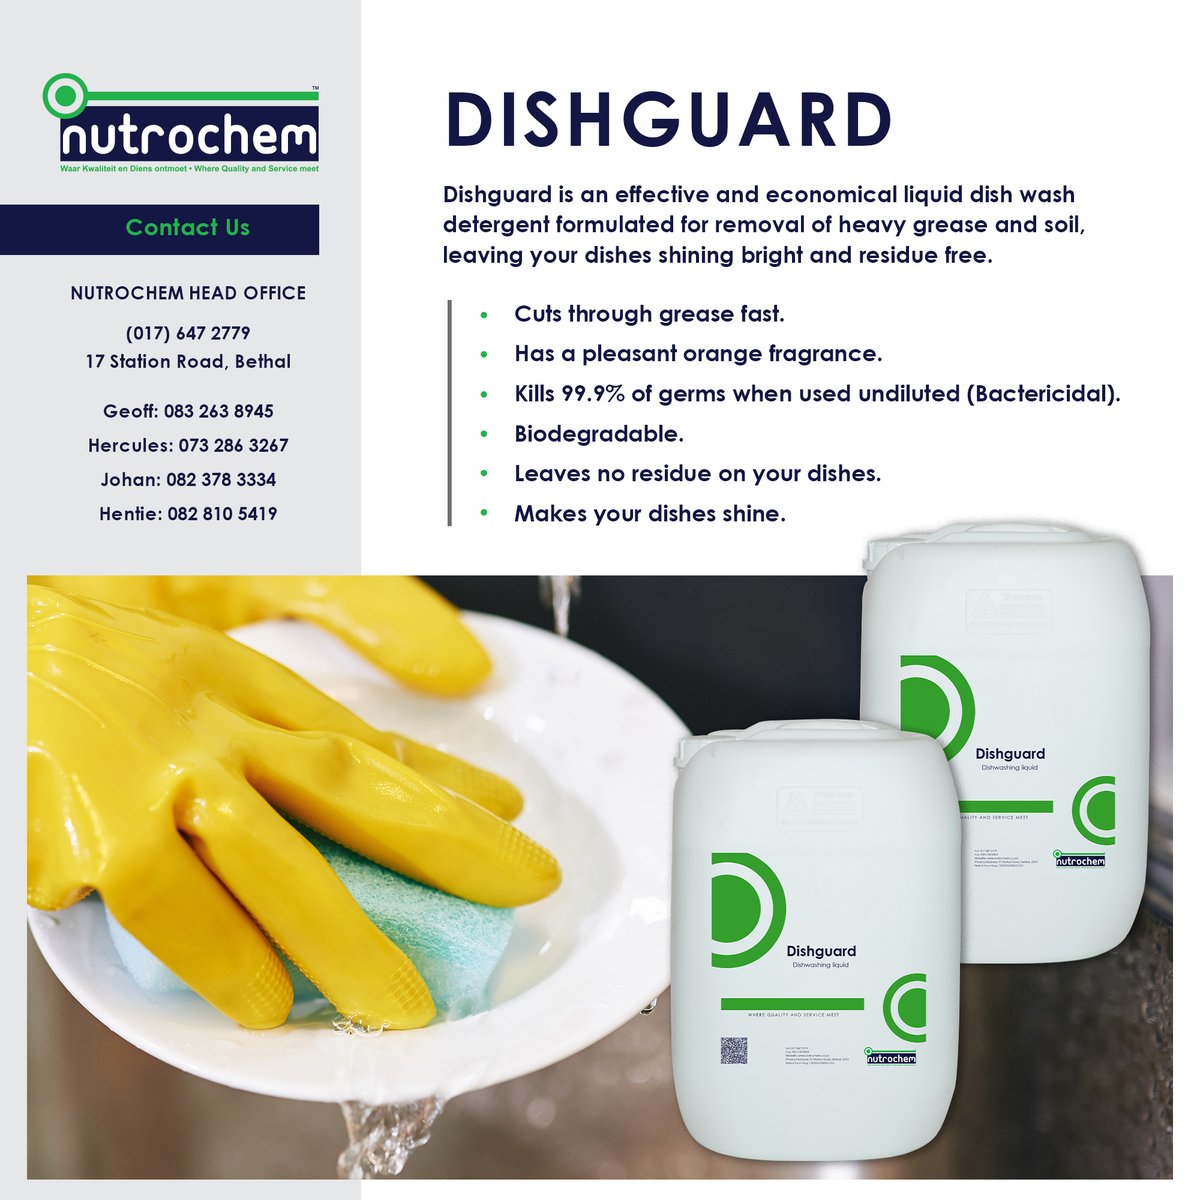 Introducing the ultimate cleaning wizard! Our powerful DISHGUARD liquid dish wash detergent effortlessly tackles grease and grime, leaving your dishes sparkling clean and smelling fresh. 

#CleanSolutions #DishwashingDelight #SparklingClea